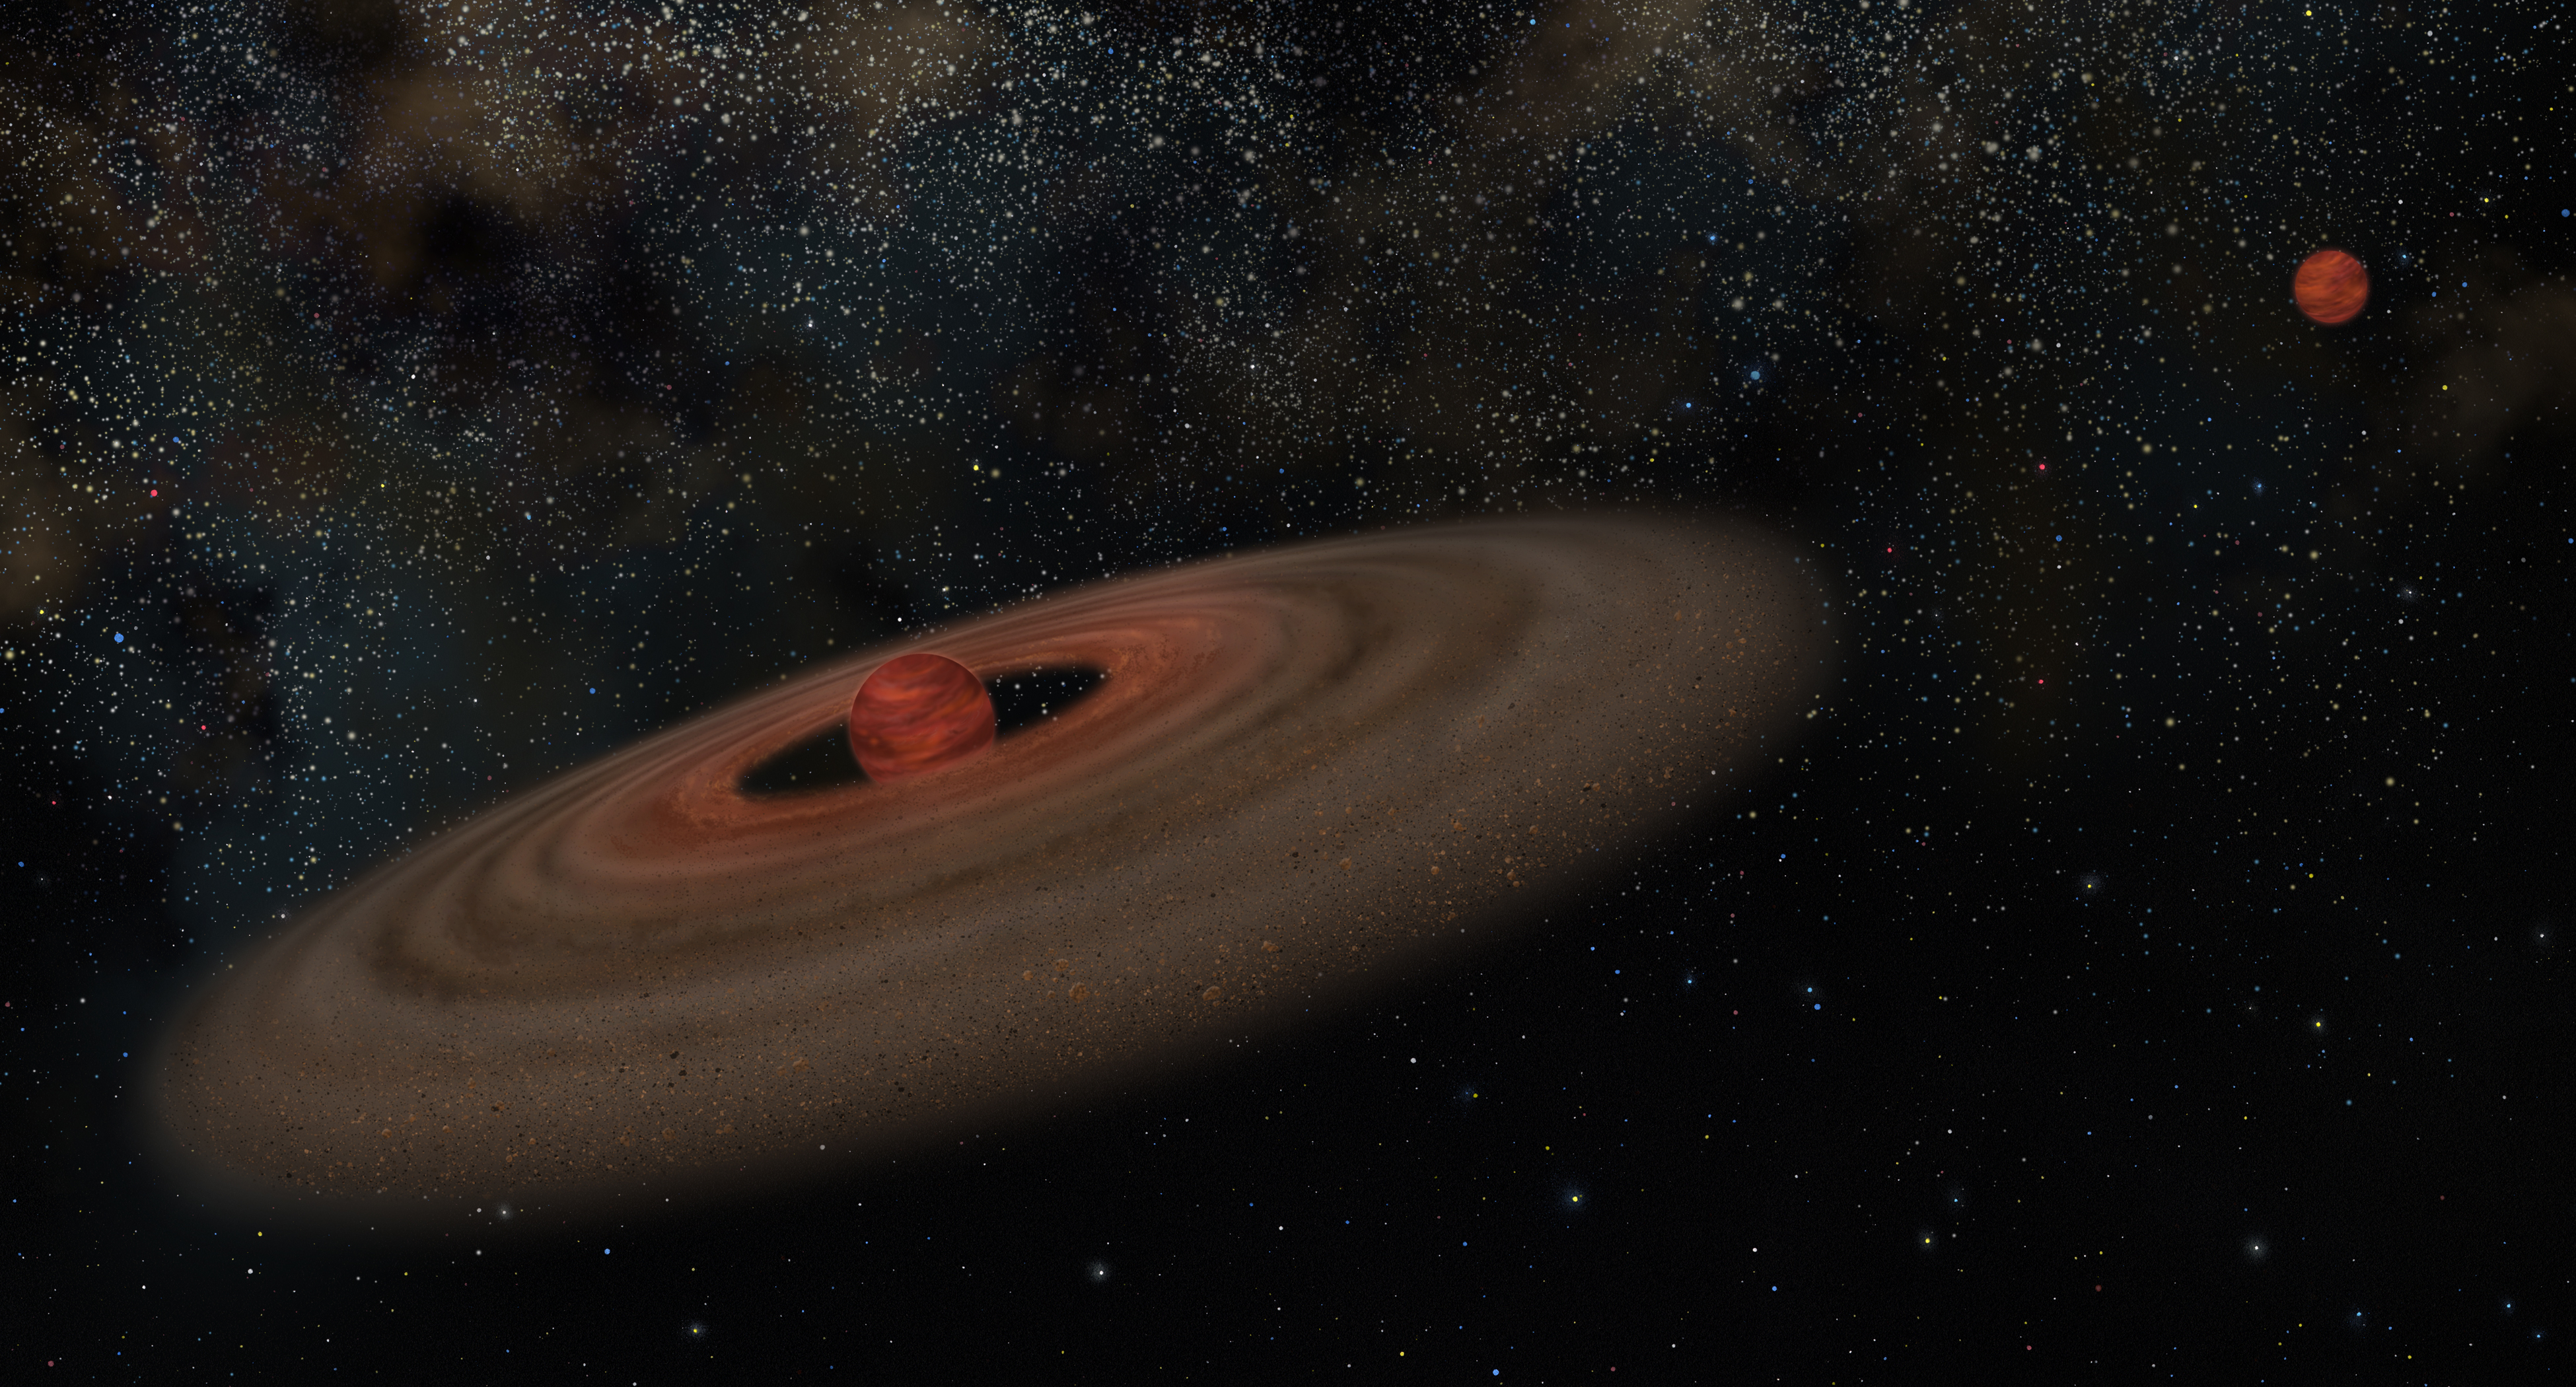 Artist illustration: lower-left holds a reddish-orange brown dwarf with a disk of material around it. Upper-right corner holds another brown dwarf with no disk. Background is black and dotted with stars.